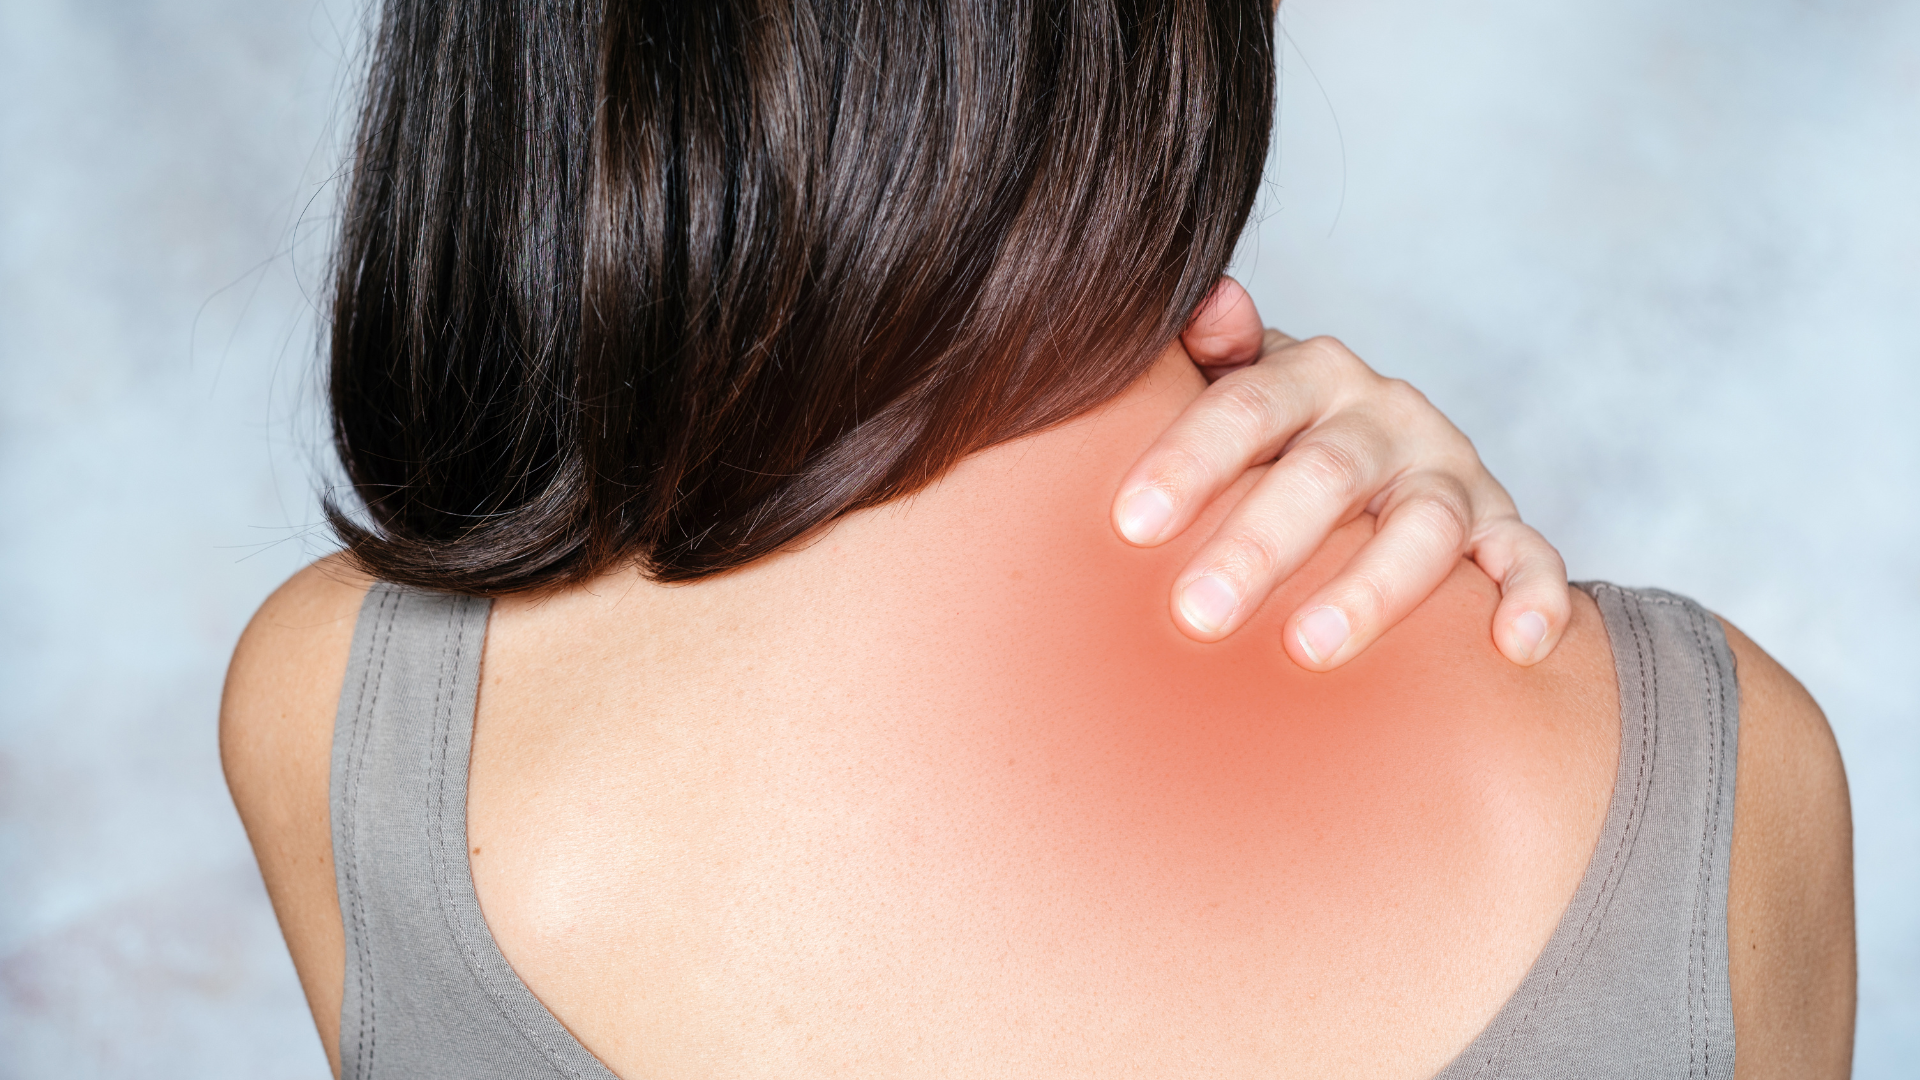 How Trigger Point Massage Helps Neck Pain